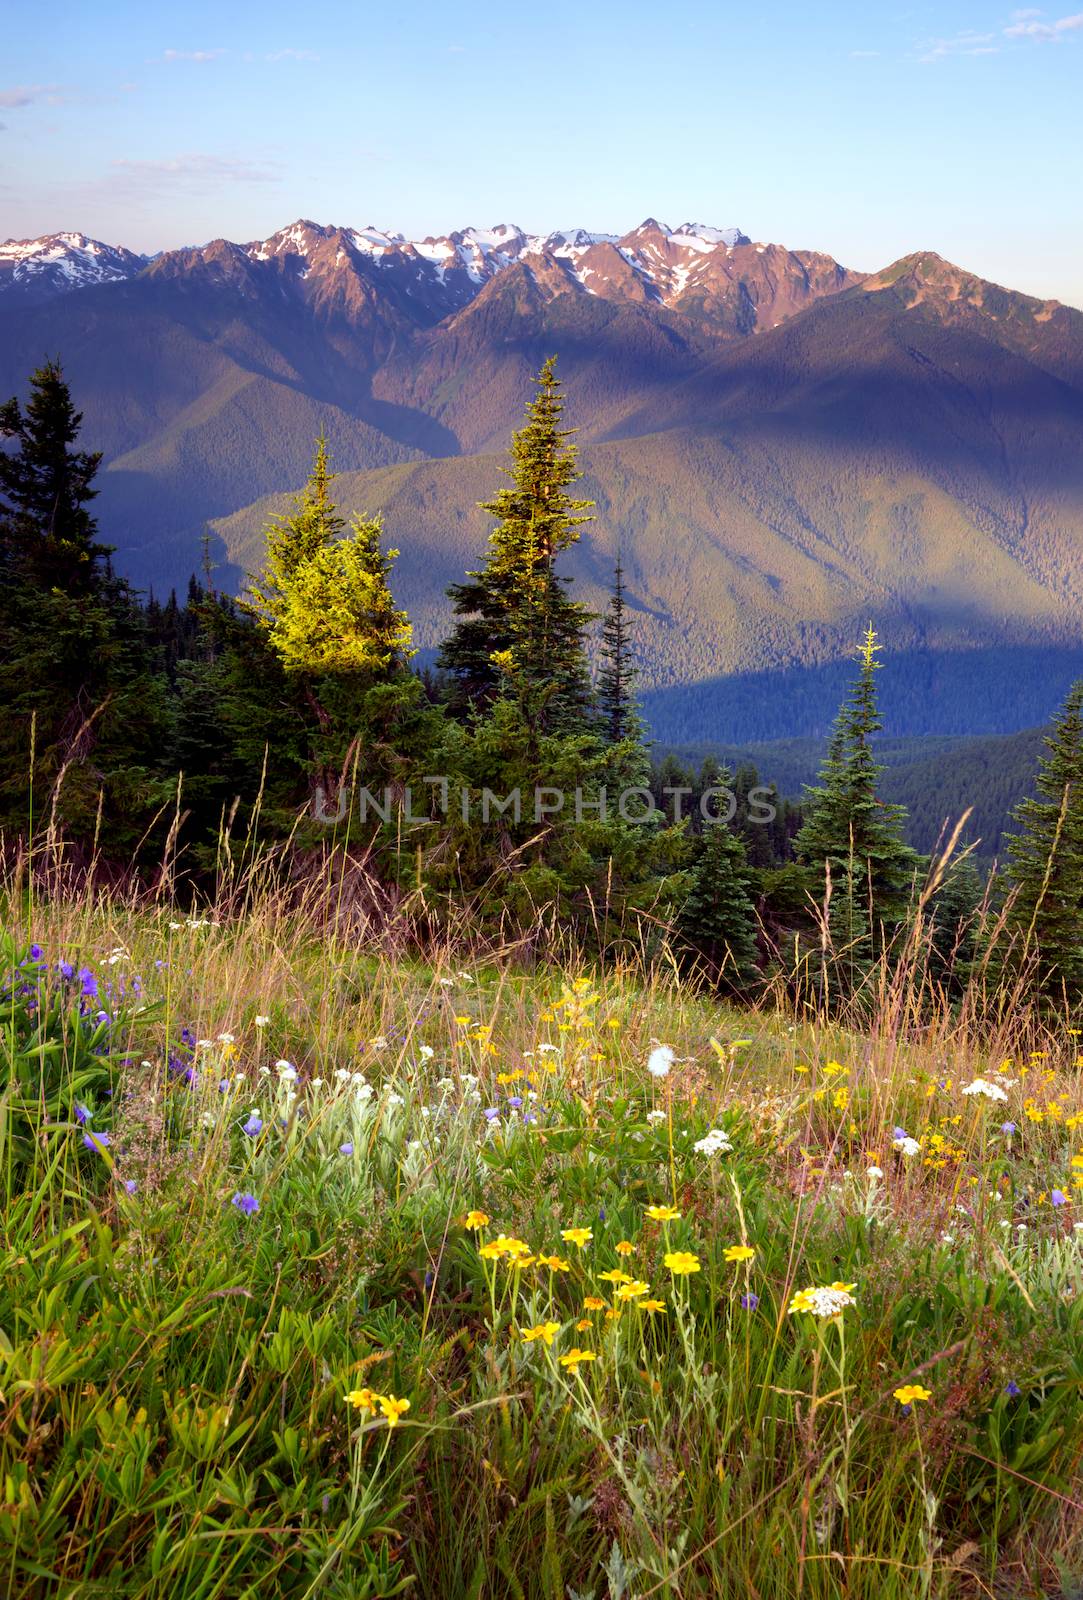 Wildflowers Cover Hillside Olympic Mountains Hurricane Ridge by ChrisBoswell